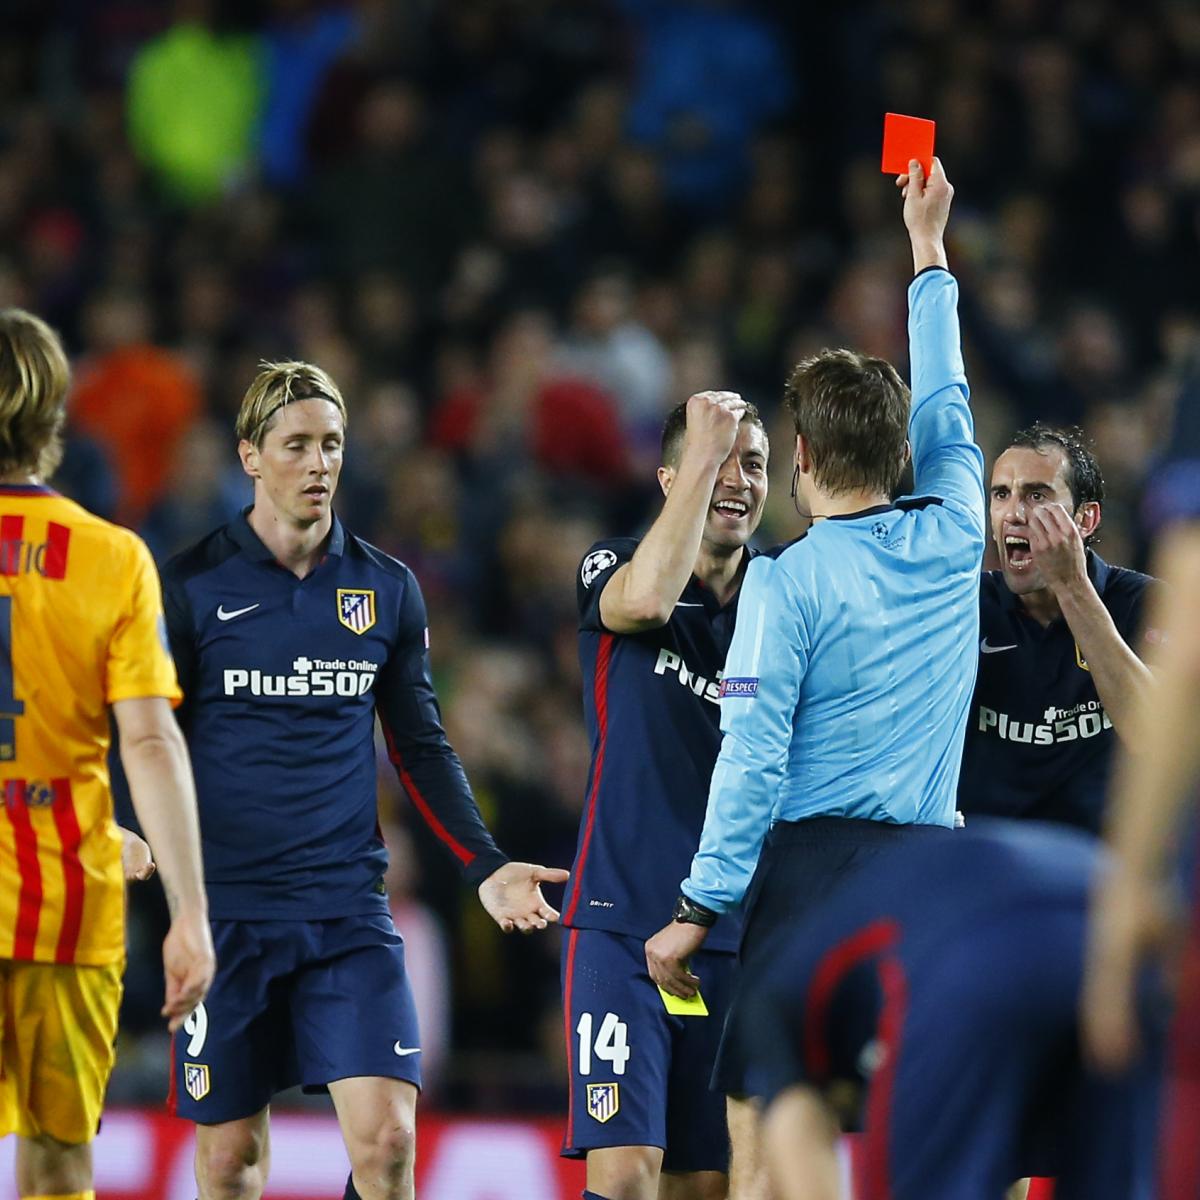 Barcelona vs. Atletico Madrid: Torres, Luis Suarez Comment on Red Card | News, Highlights, Stats, and | Bleacher Report